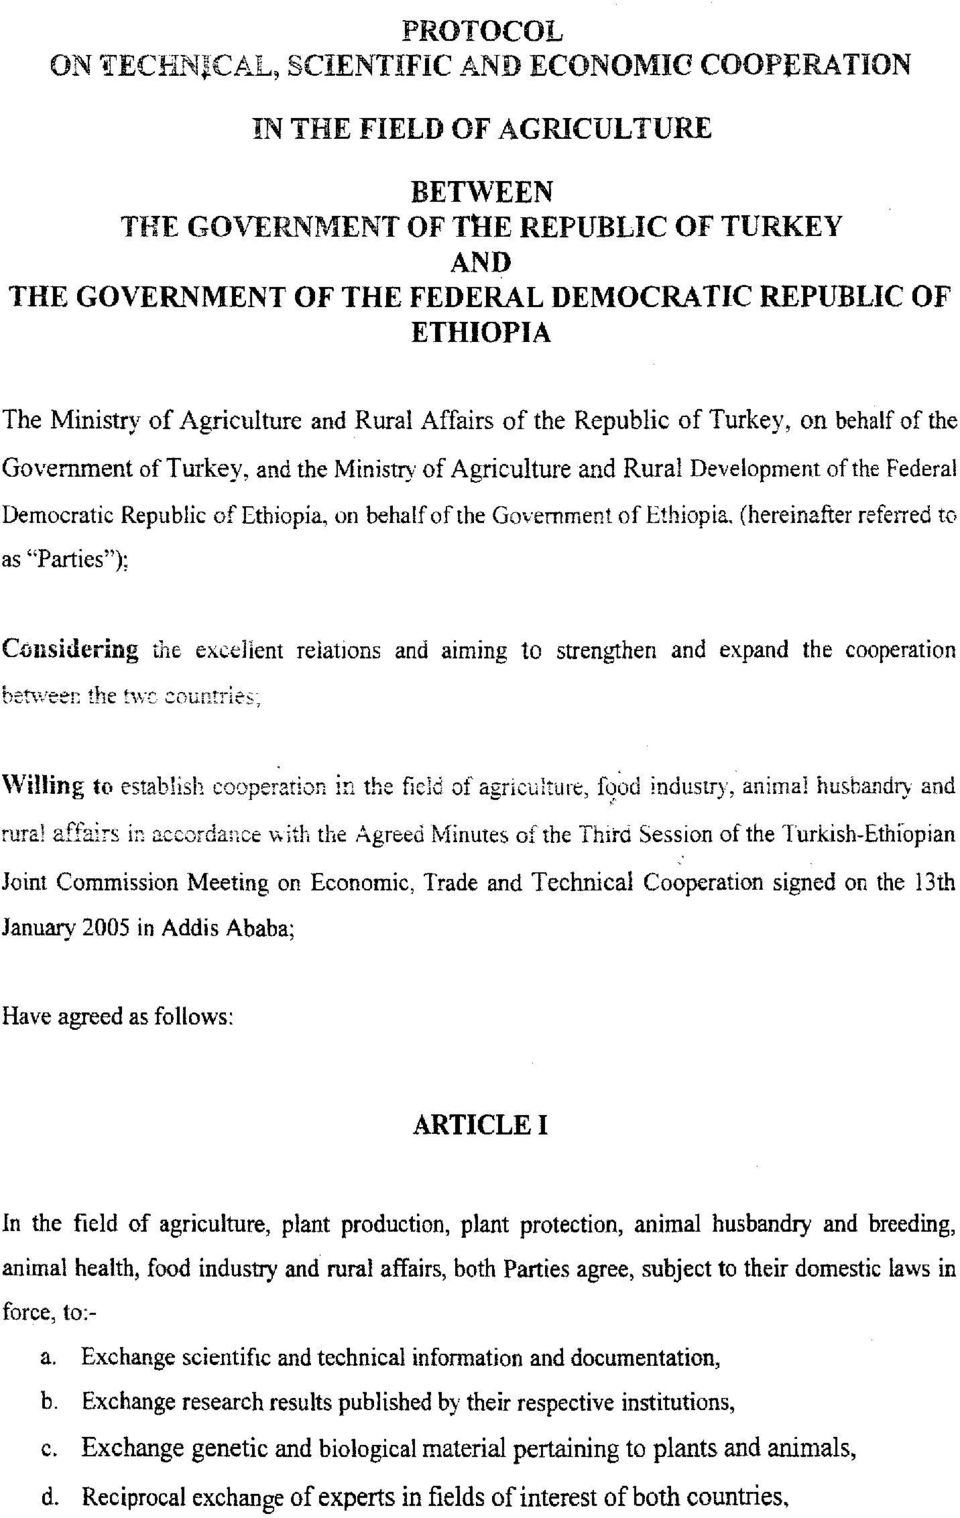 Republic ofethiopia, on behalfofthe Government ofethiopia, (hereinafter referred to as "Parties"); Considering the excellent relations and aiming to ben-veer: the t\vg countries; strengthen and